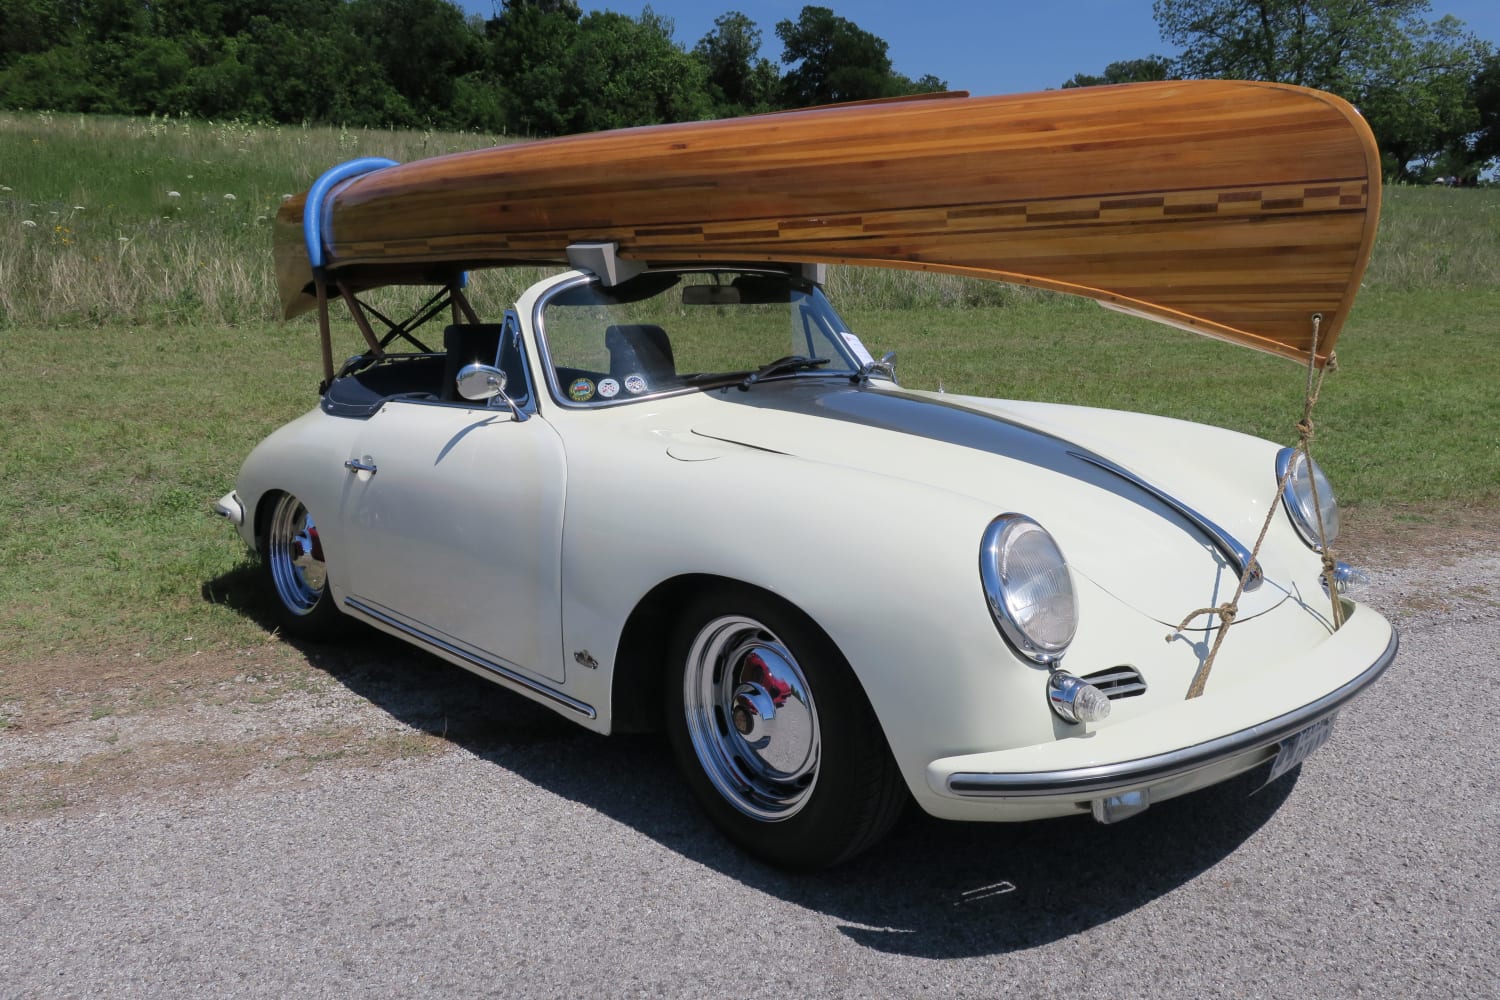 When you really want to canoe but only have a Porsche 356.